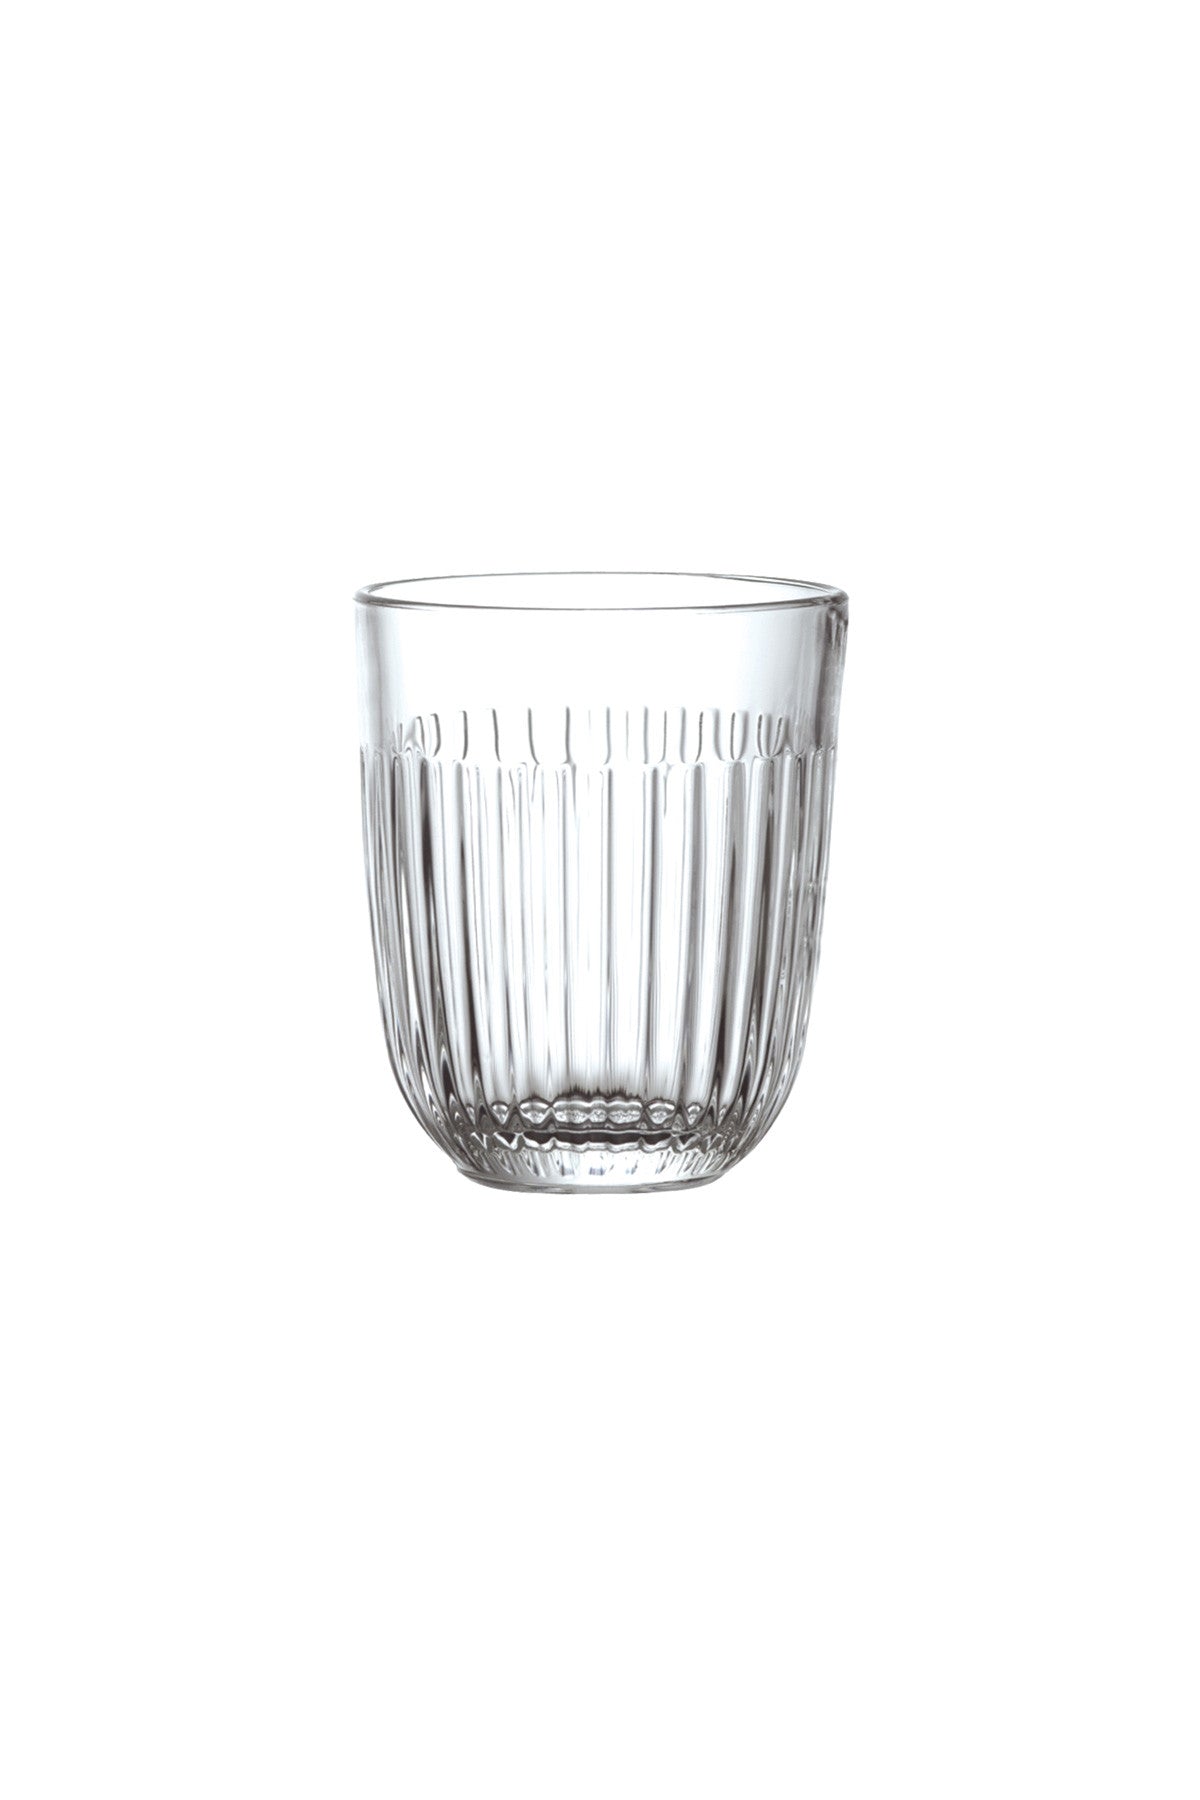 GLASS 290 ml, Ouessant